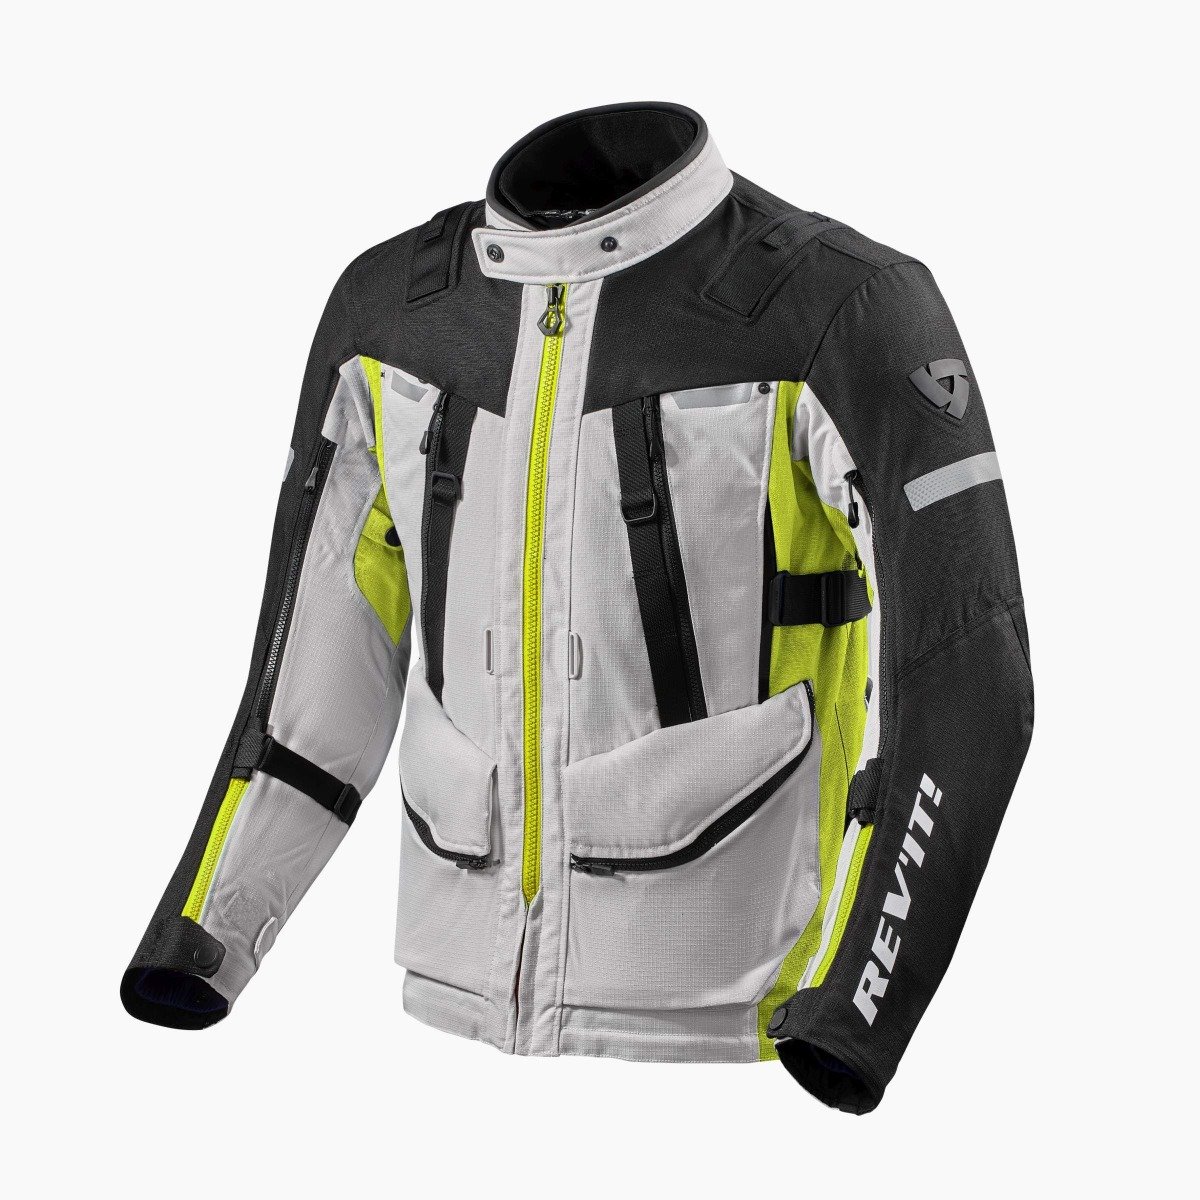 Image of REV'IT! Sand 4 H2O Jacket Silver Neon Yellow Size 2XL ID 8700001311199